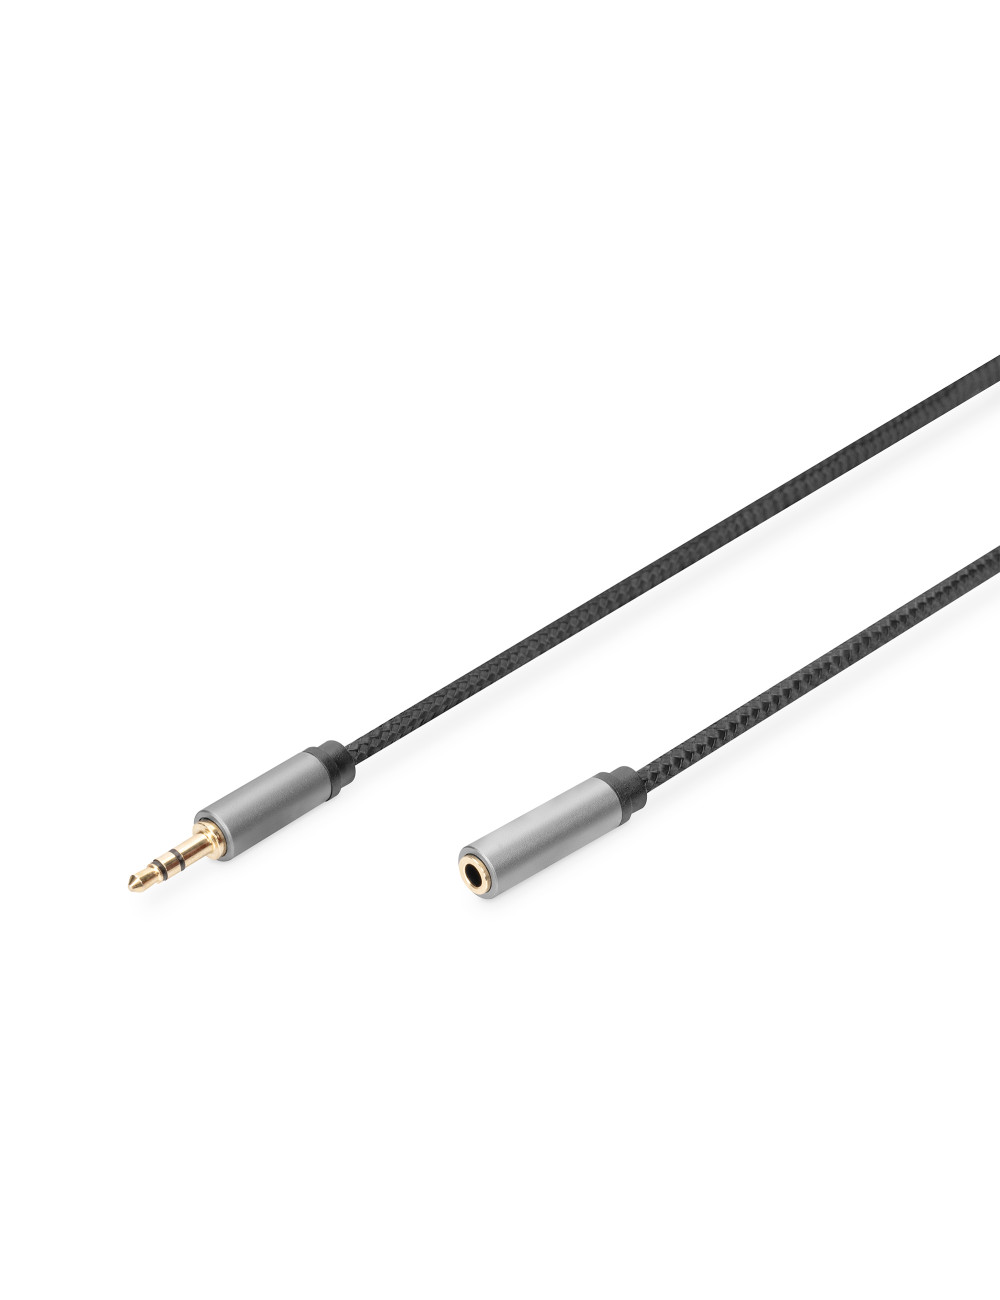 Digitus AUX Audio Cable Stereo 3.5mm Male to Female Aluminum Housing DB-510210-018-S 1.8 m